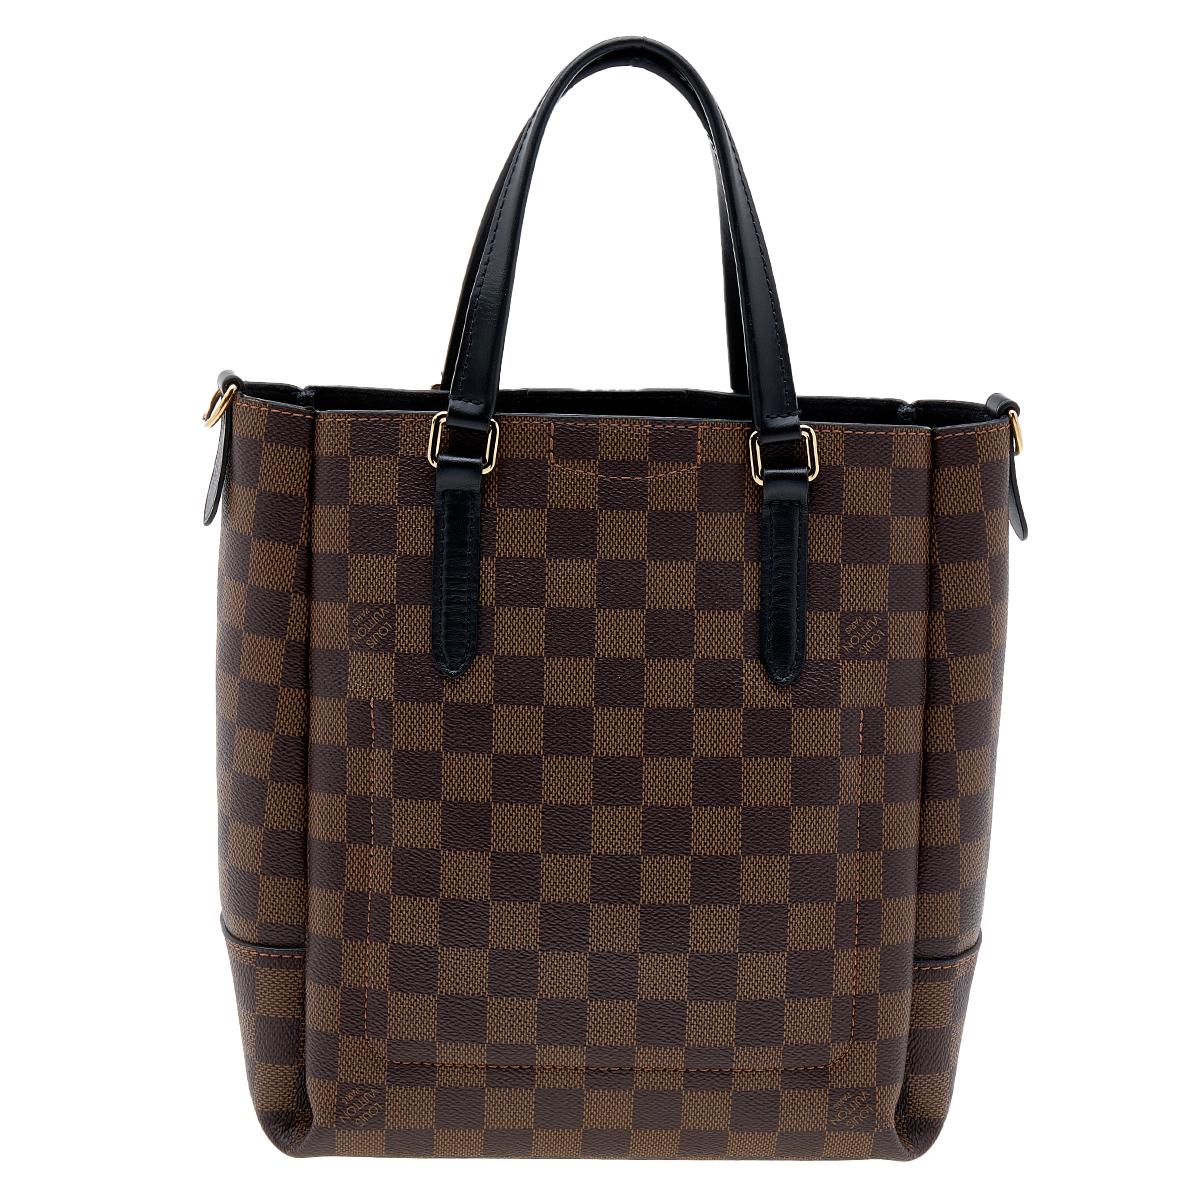 Louis Vuitton's Belmont bag is designed to assist you seamlessly in putting your best foot forward. Carrying it will always be a delight! It comes crafted from the signature Damier Ebene canvas and features dual top handles. It also comes with a